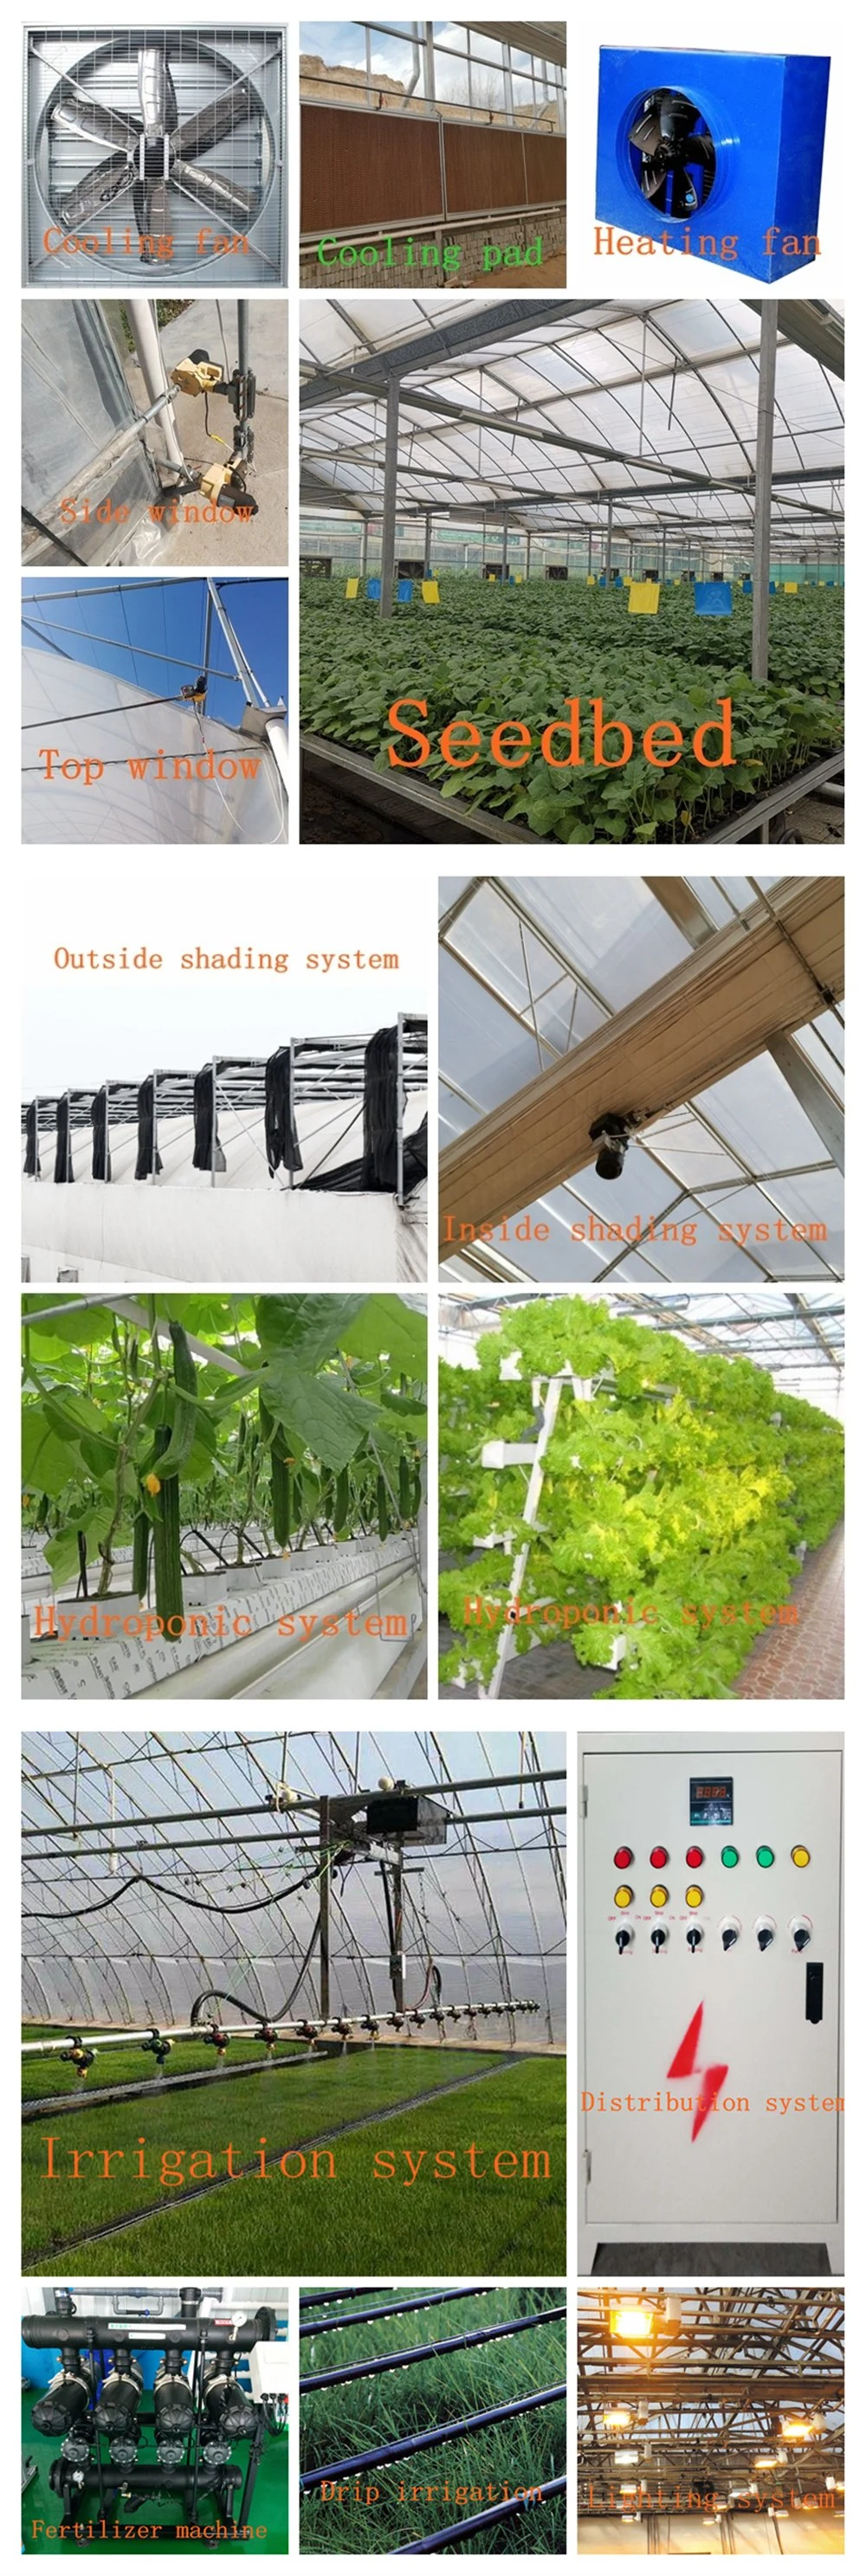 China Commercial/Agricultural Grow Tents/Greenhouse for Tomato/Cucumber with Hydroponics System